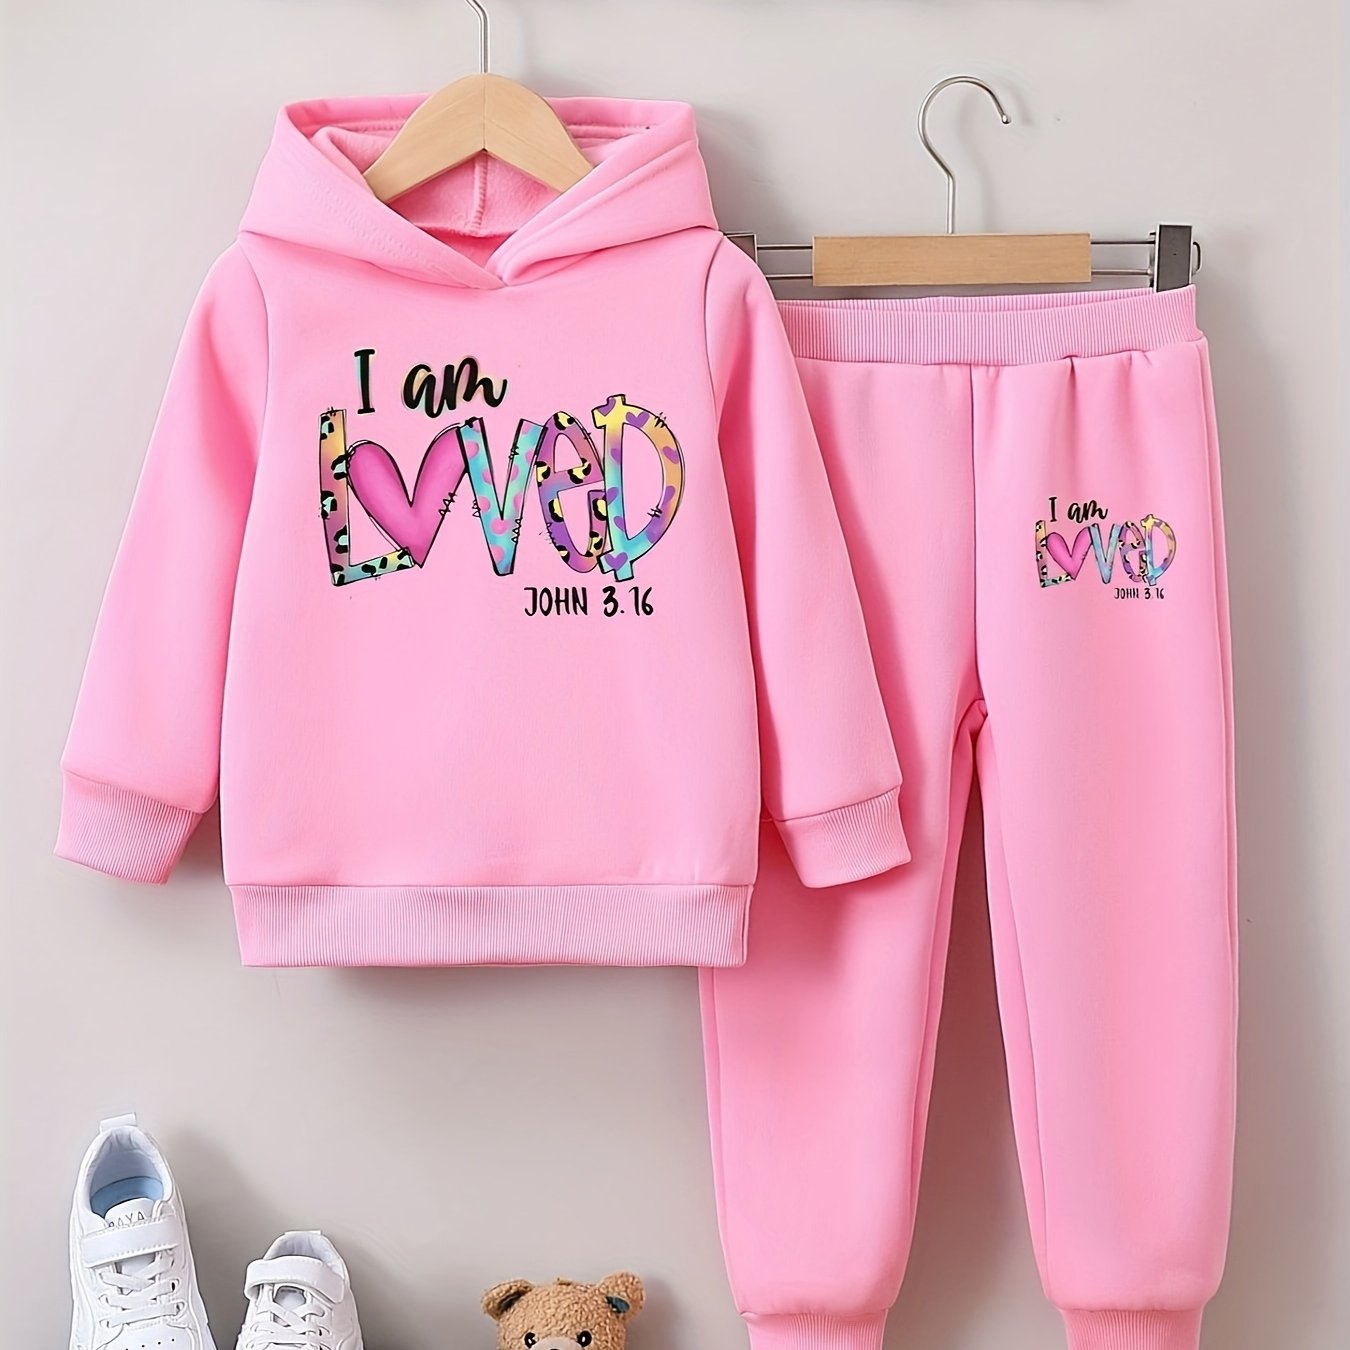 I Am Loved Youth Christian Casual Outfit claimedbygoddesigns